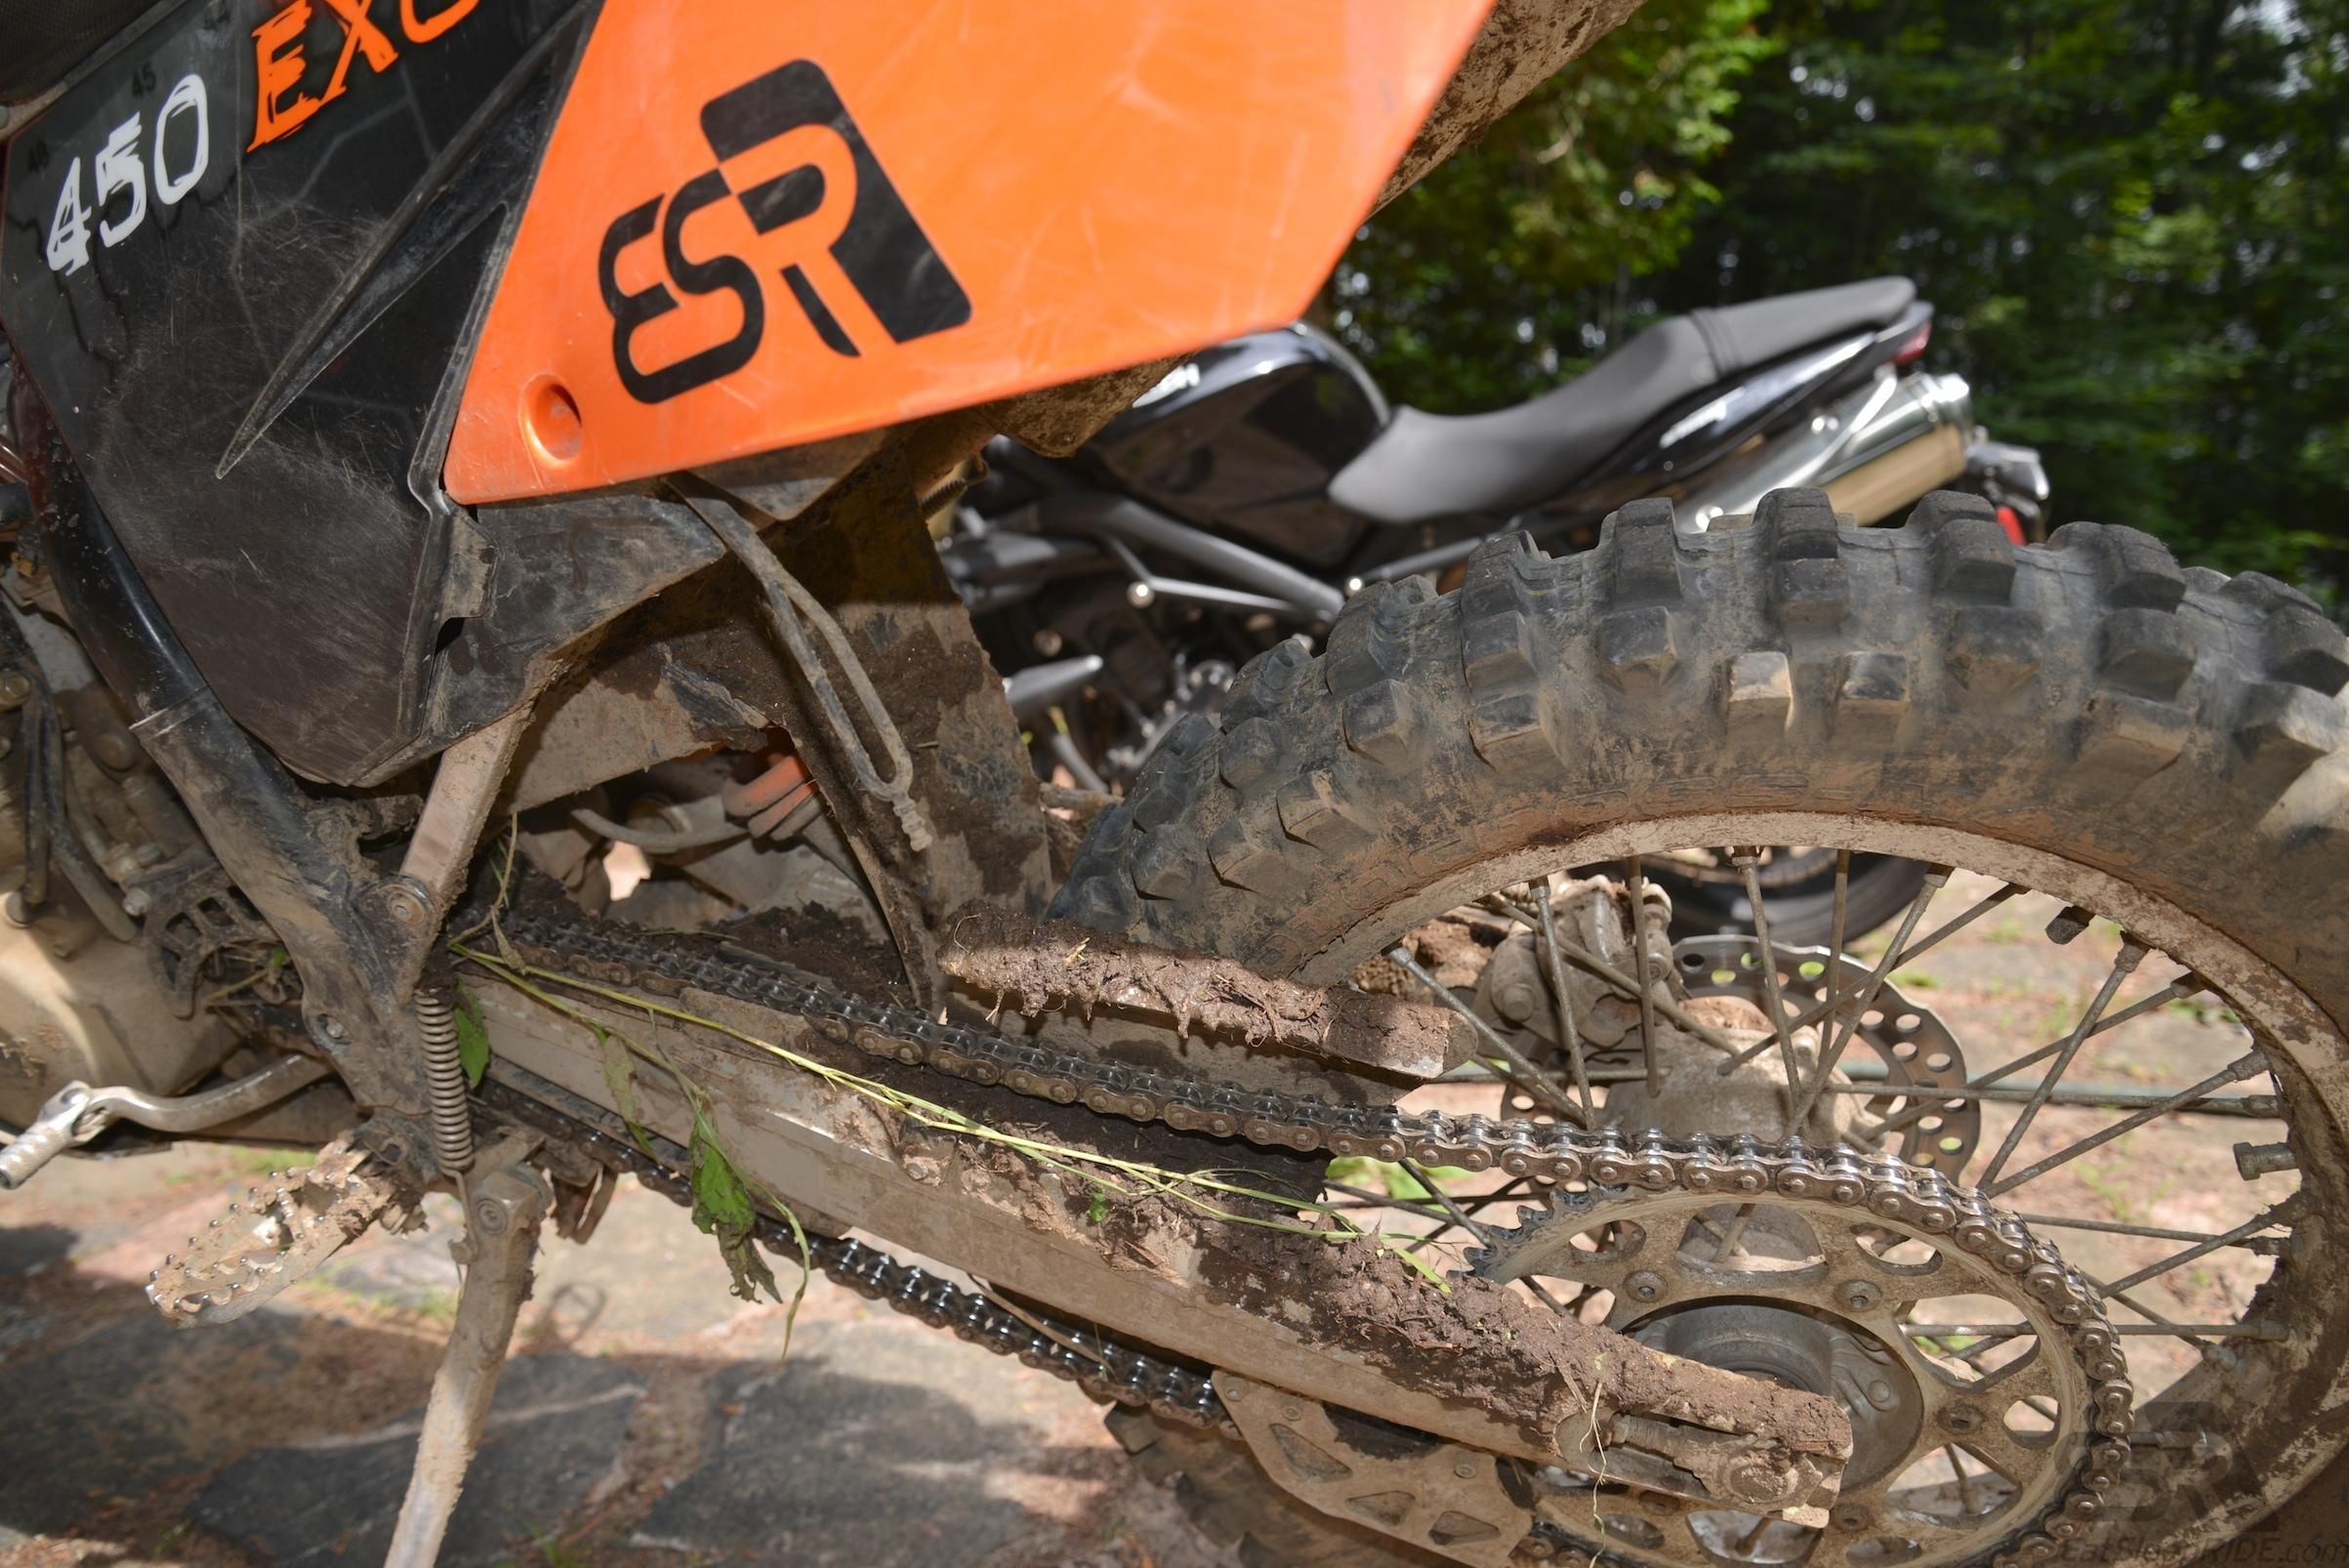 KTM 450EXC - Another good day's trail riding